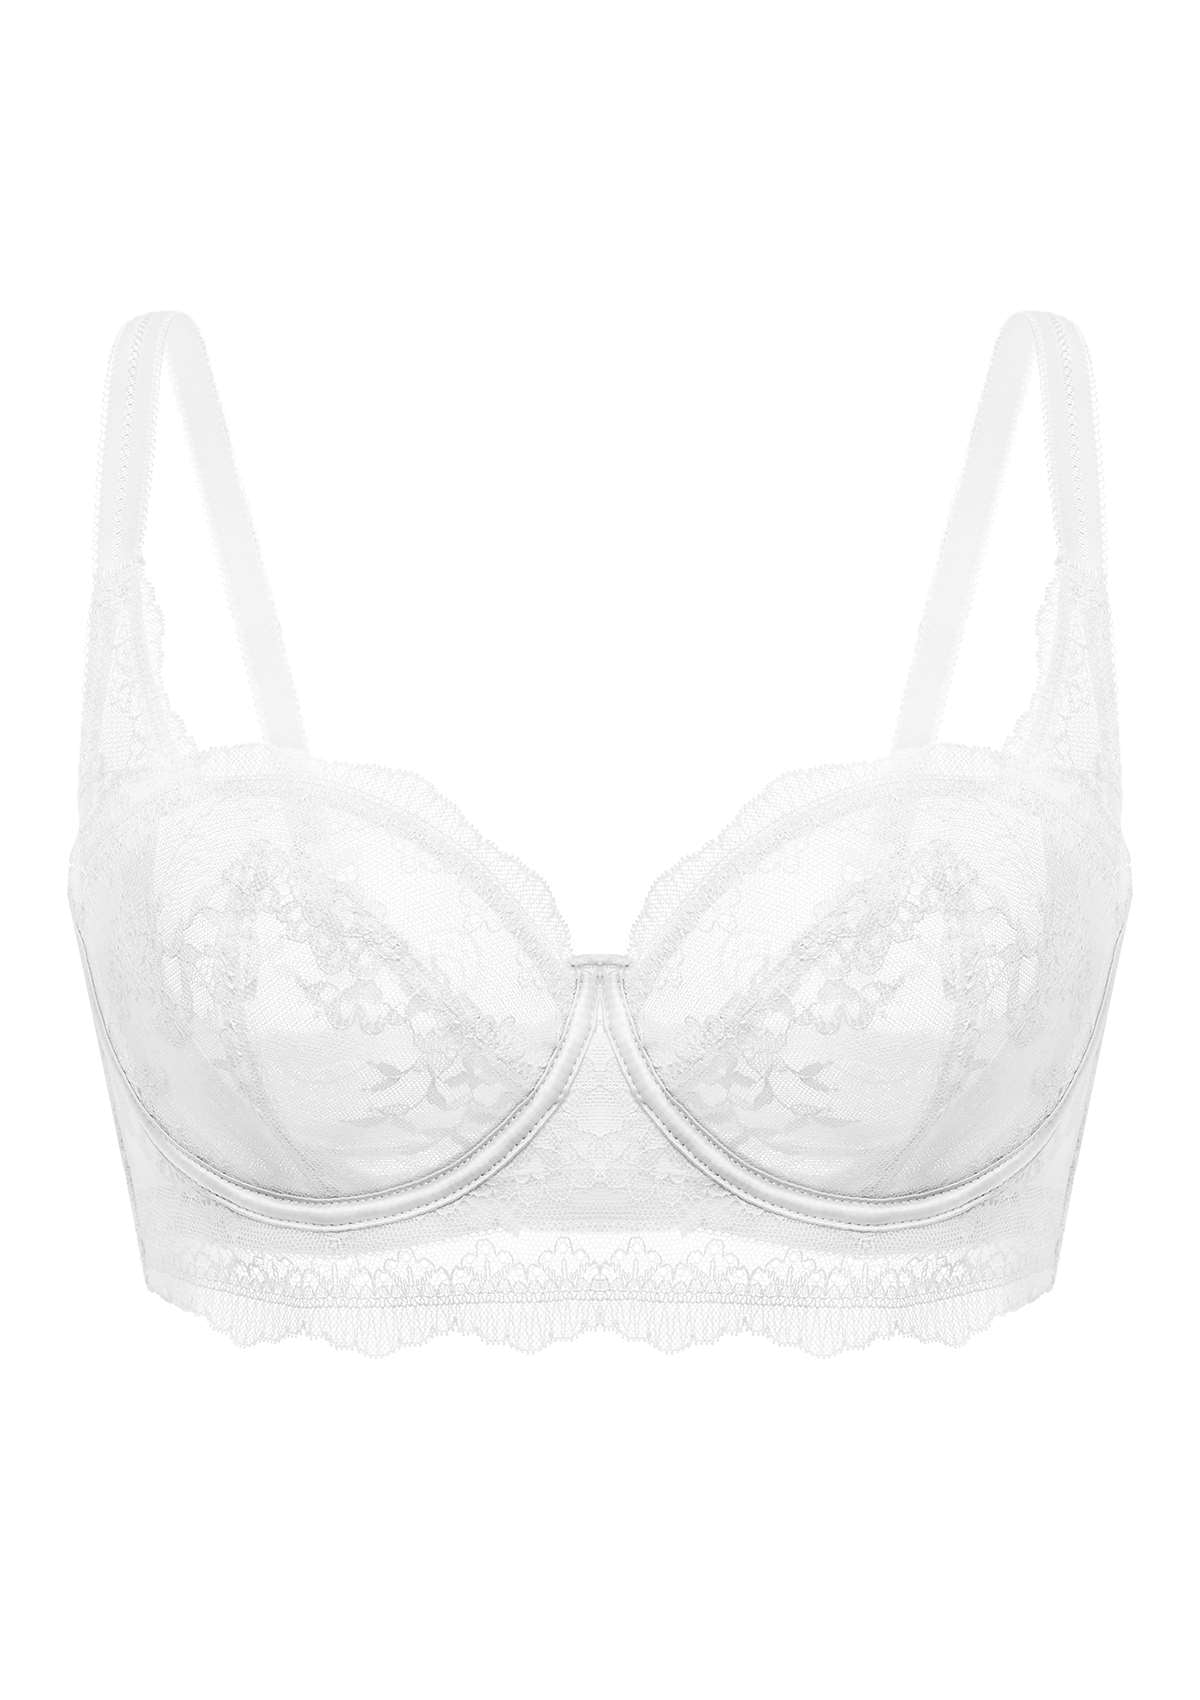 HSIA I Do Floral Lace Bridal Balconette Beautiful Bra For Special Day - Pink / 42 / DDD/F